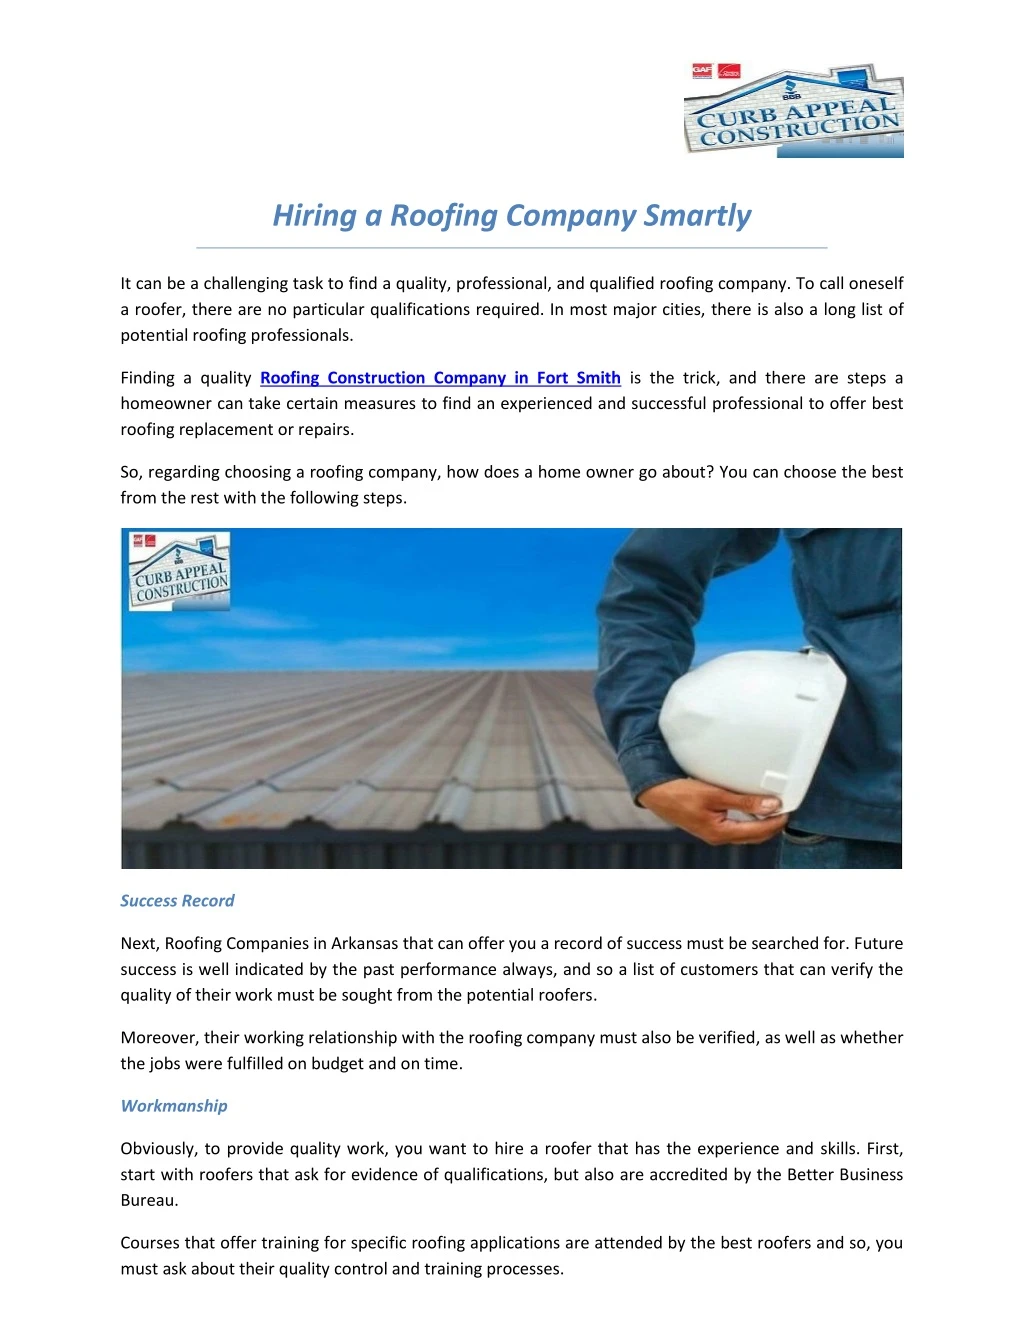 hiring a roofing company smartly